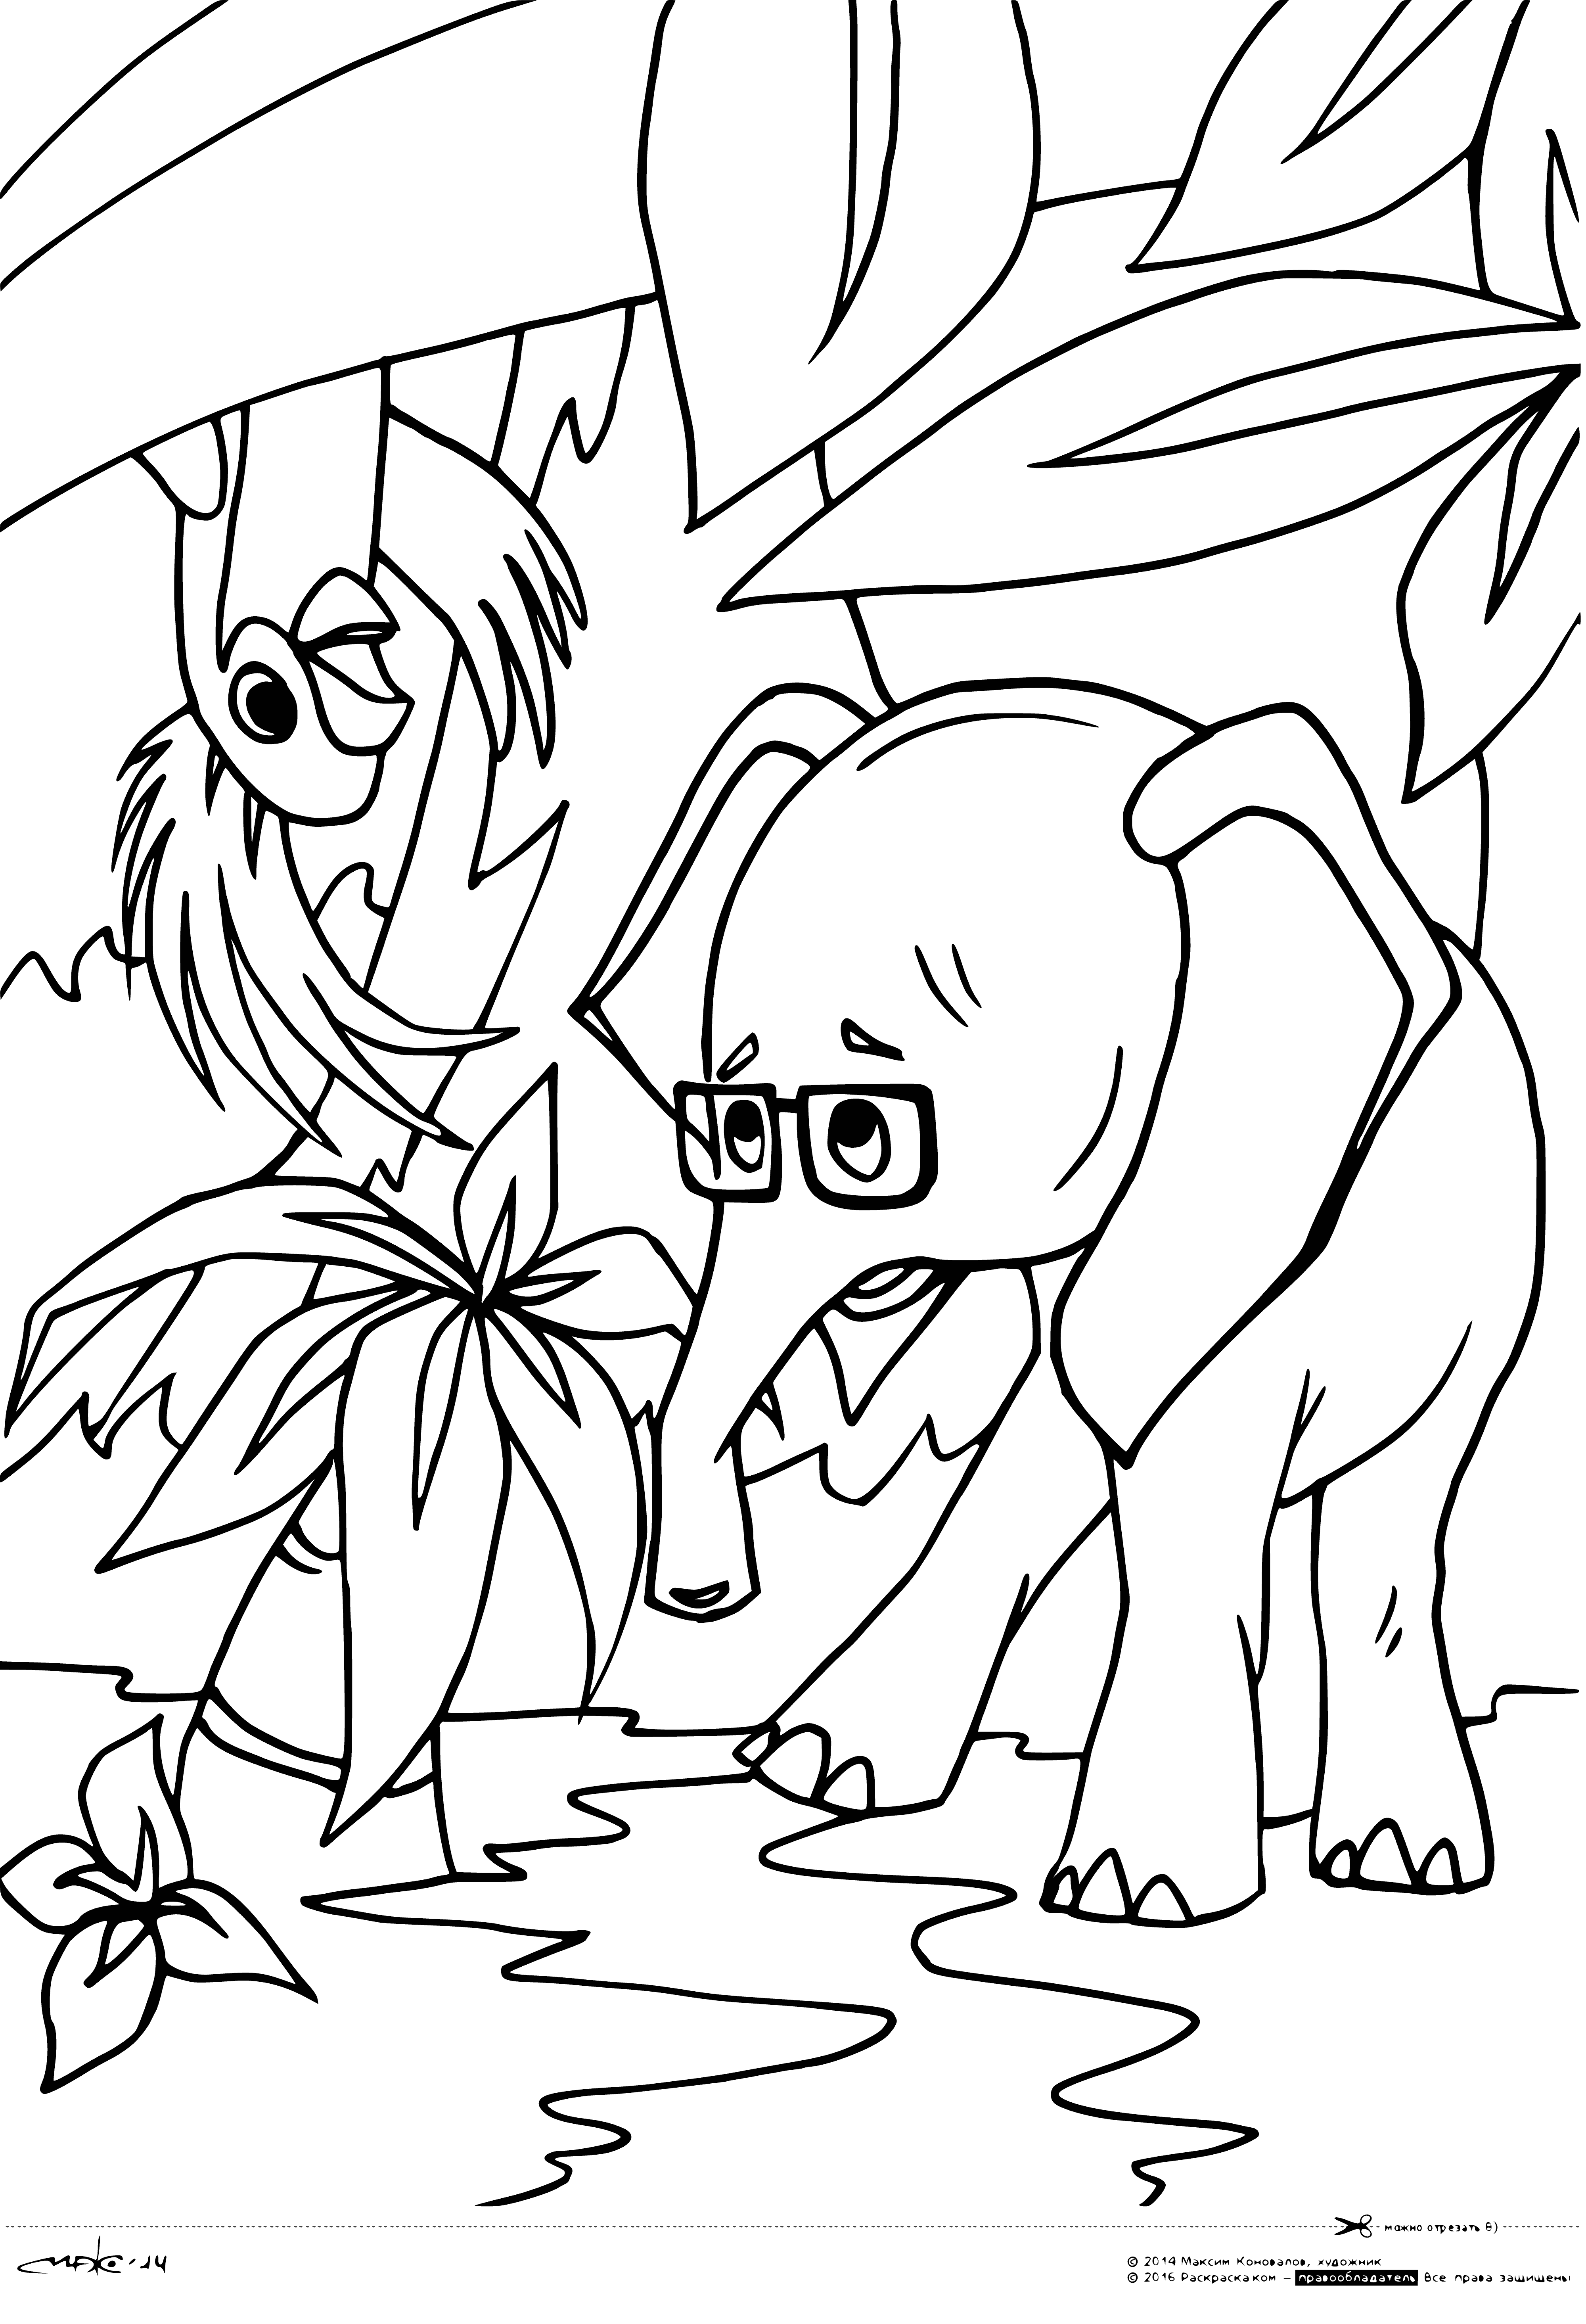 coloring page: Elephant and baby on green grass; parrot atop elephant head, wings outstretched, beak open.